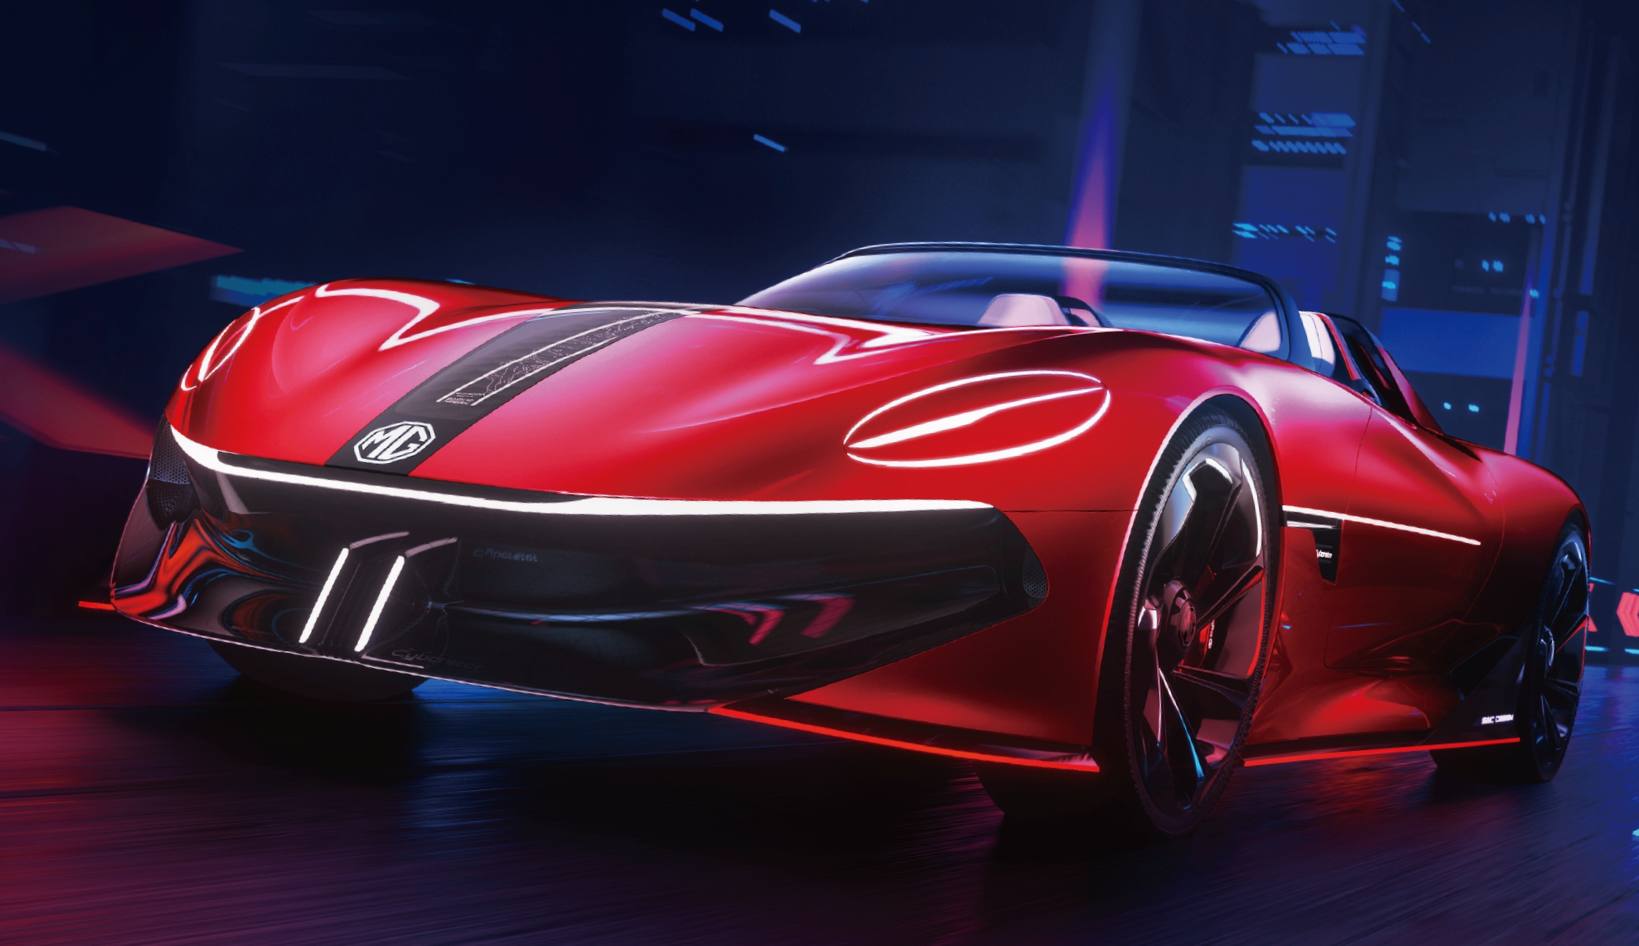  MG Cyberster concept previews 5G-ready electric sportscar with 800-kilometre range